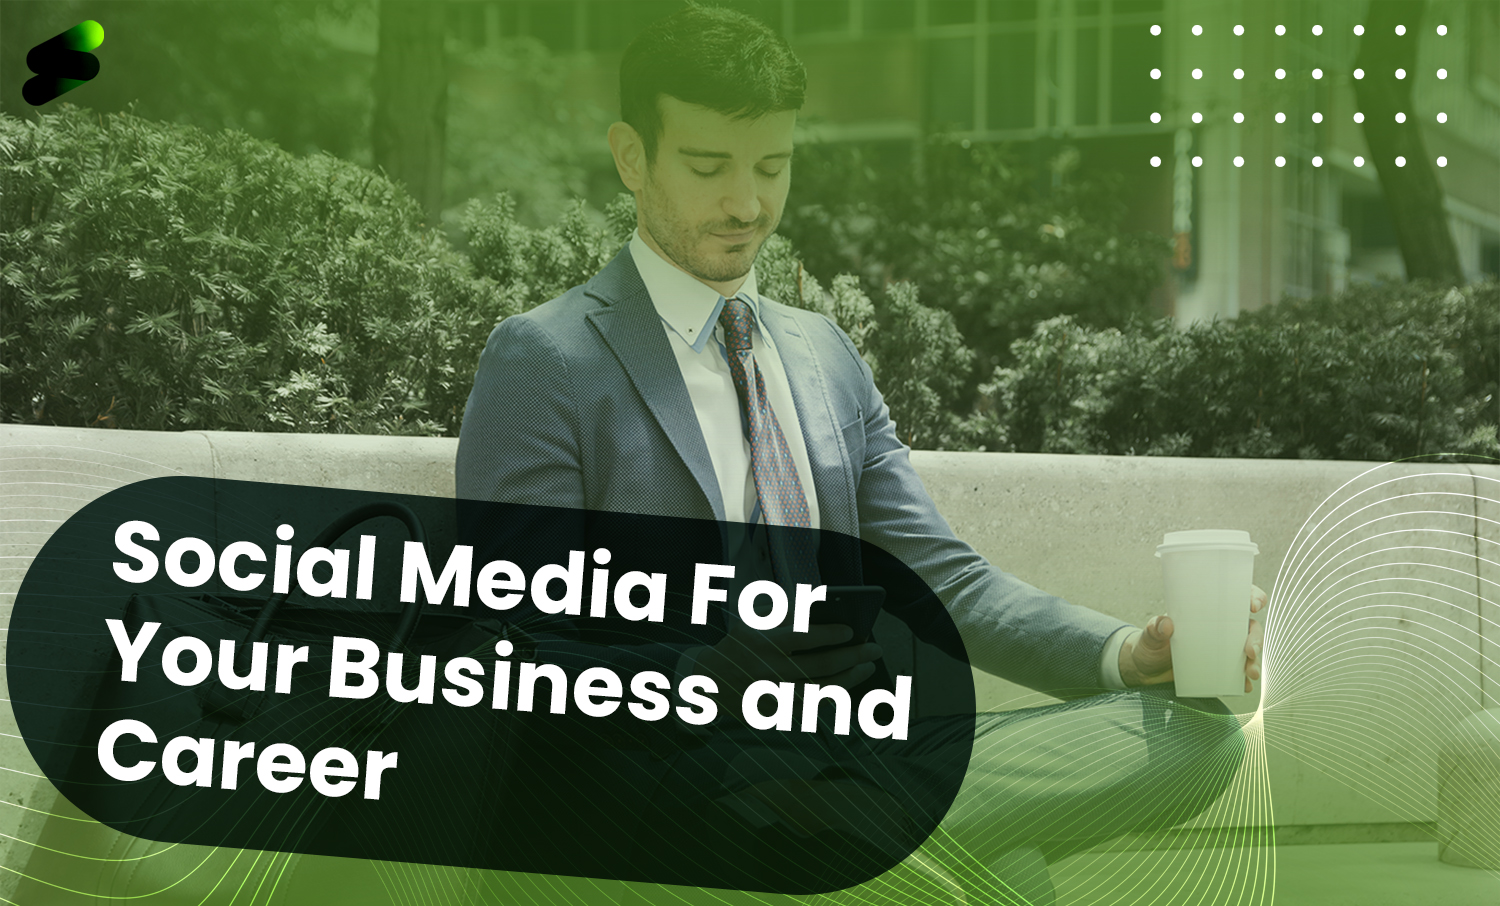 How To Make The Most Of Social Media For Your Business and Career?